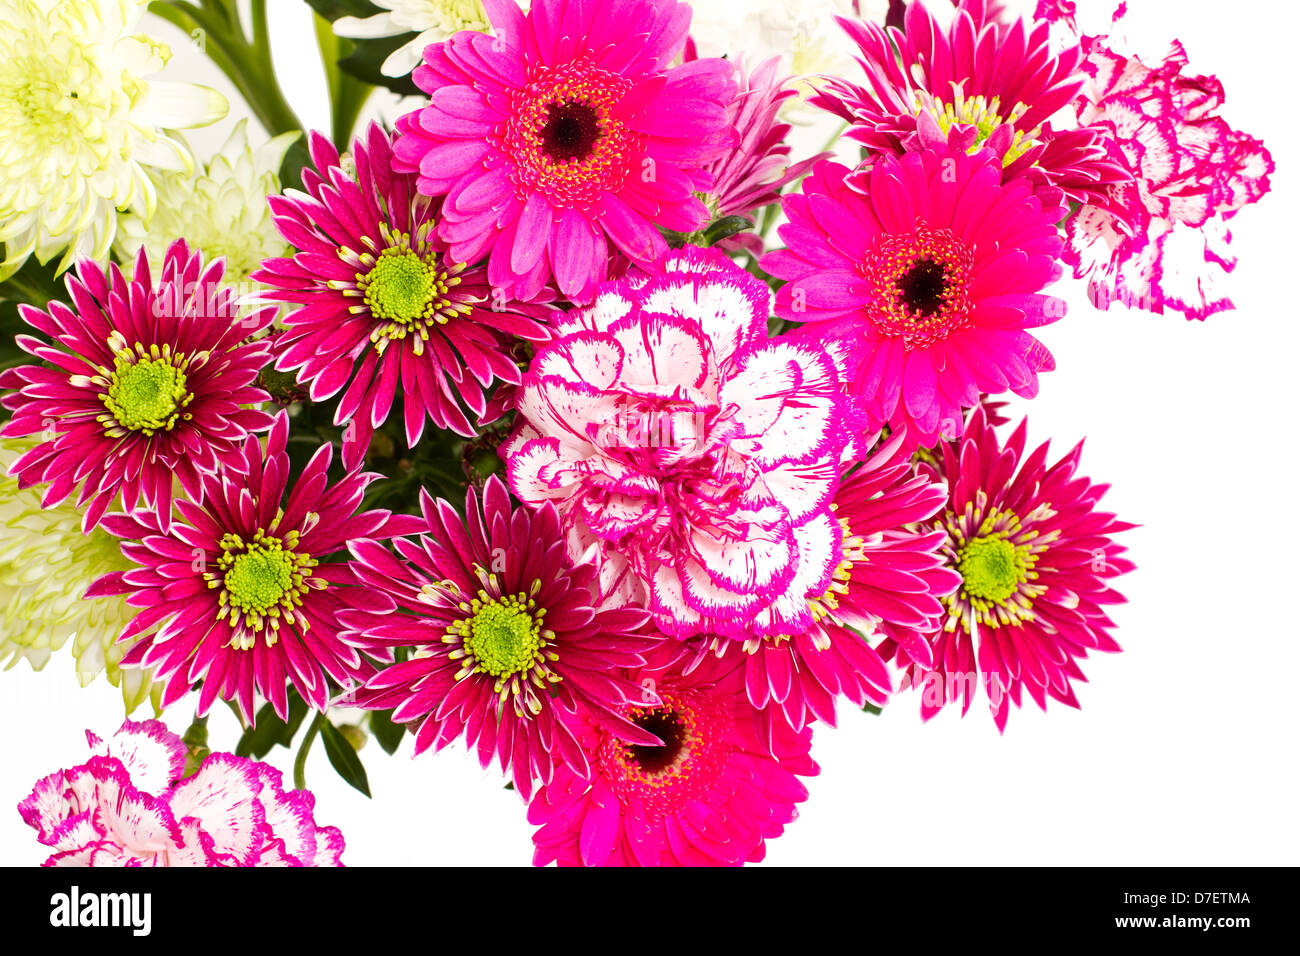 bunch of various pink flowers cropped Stock Photo